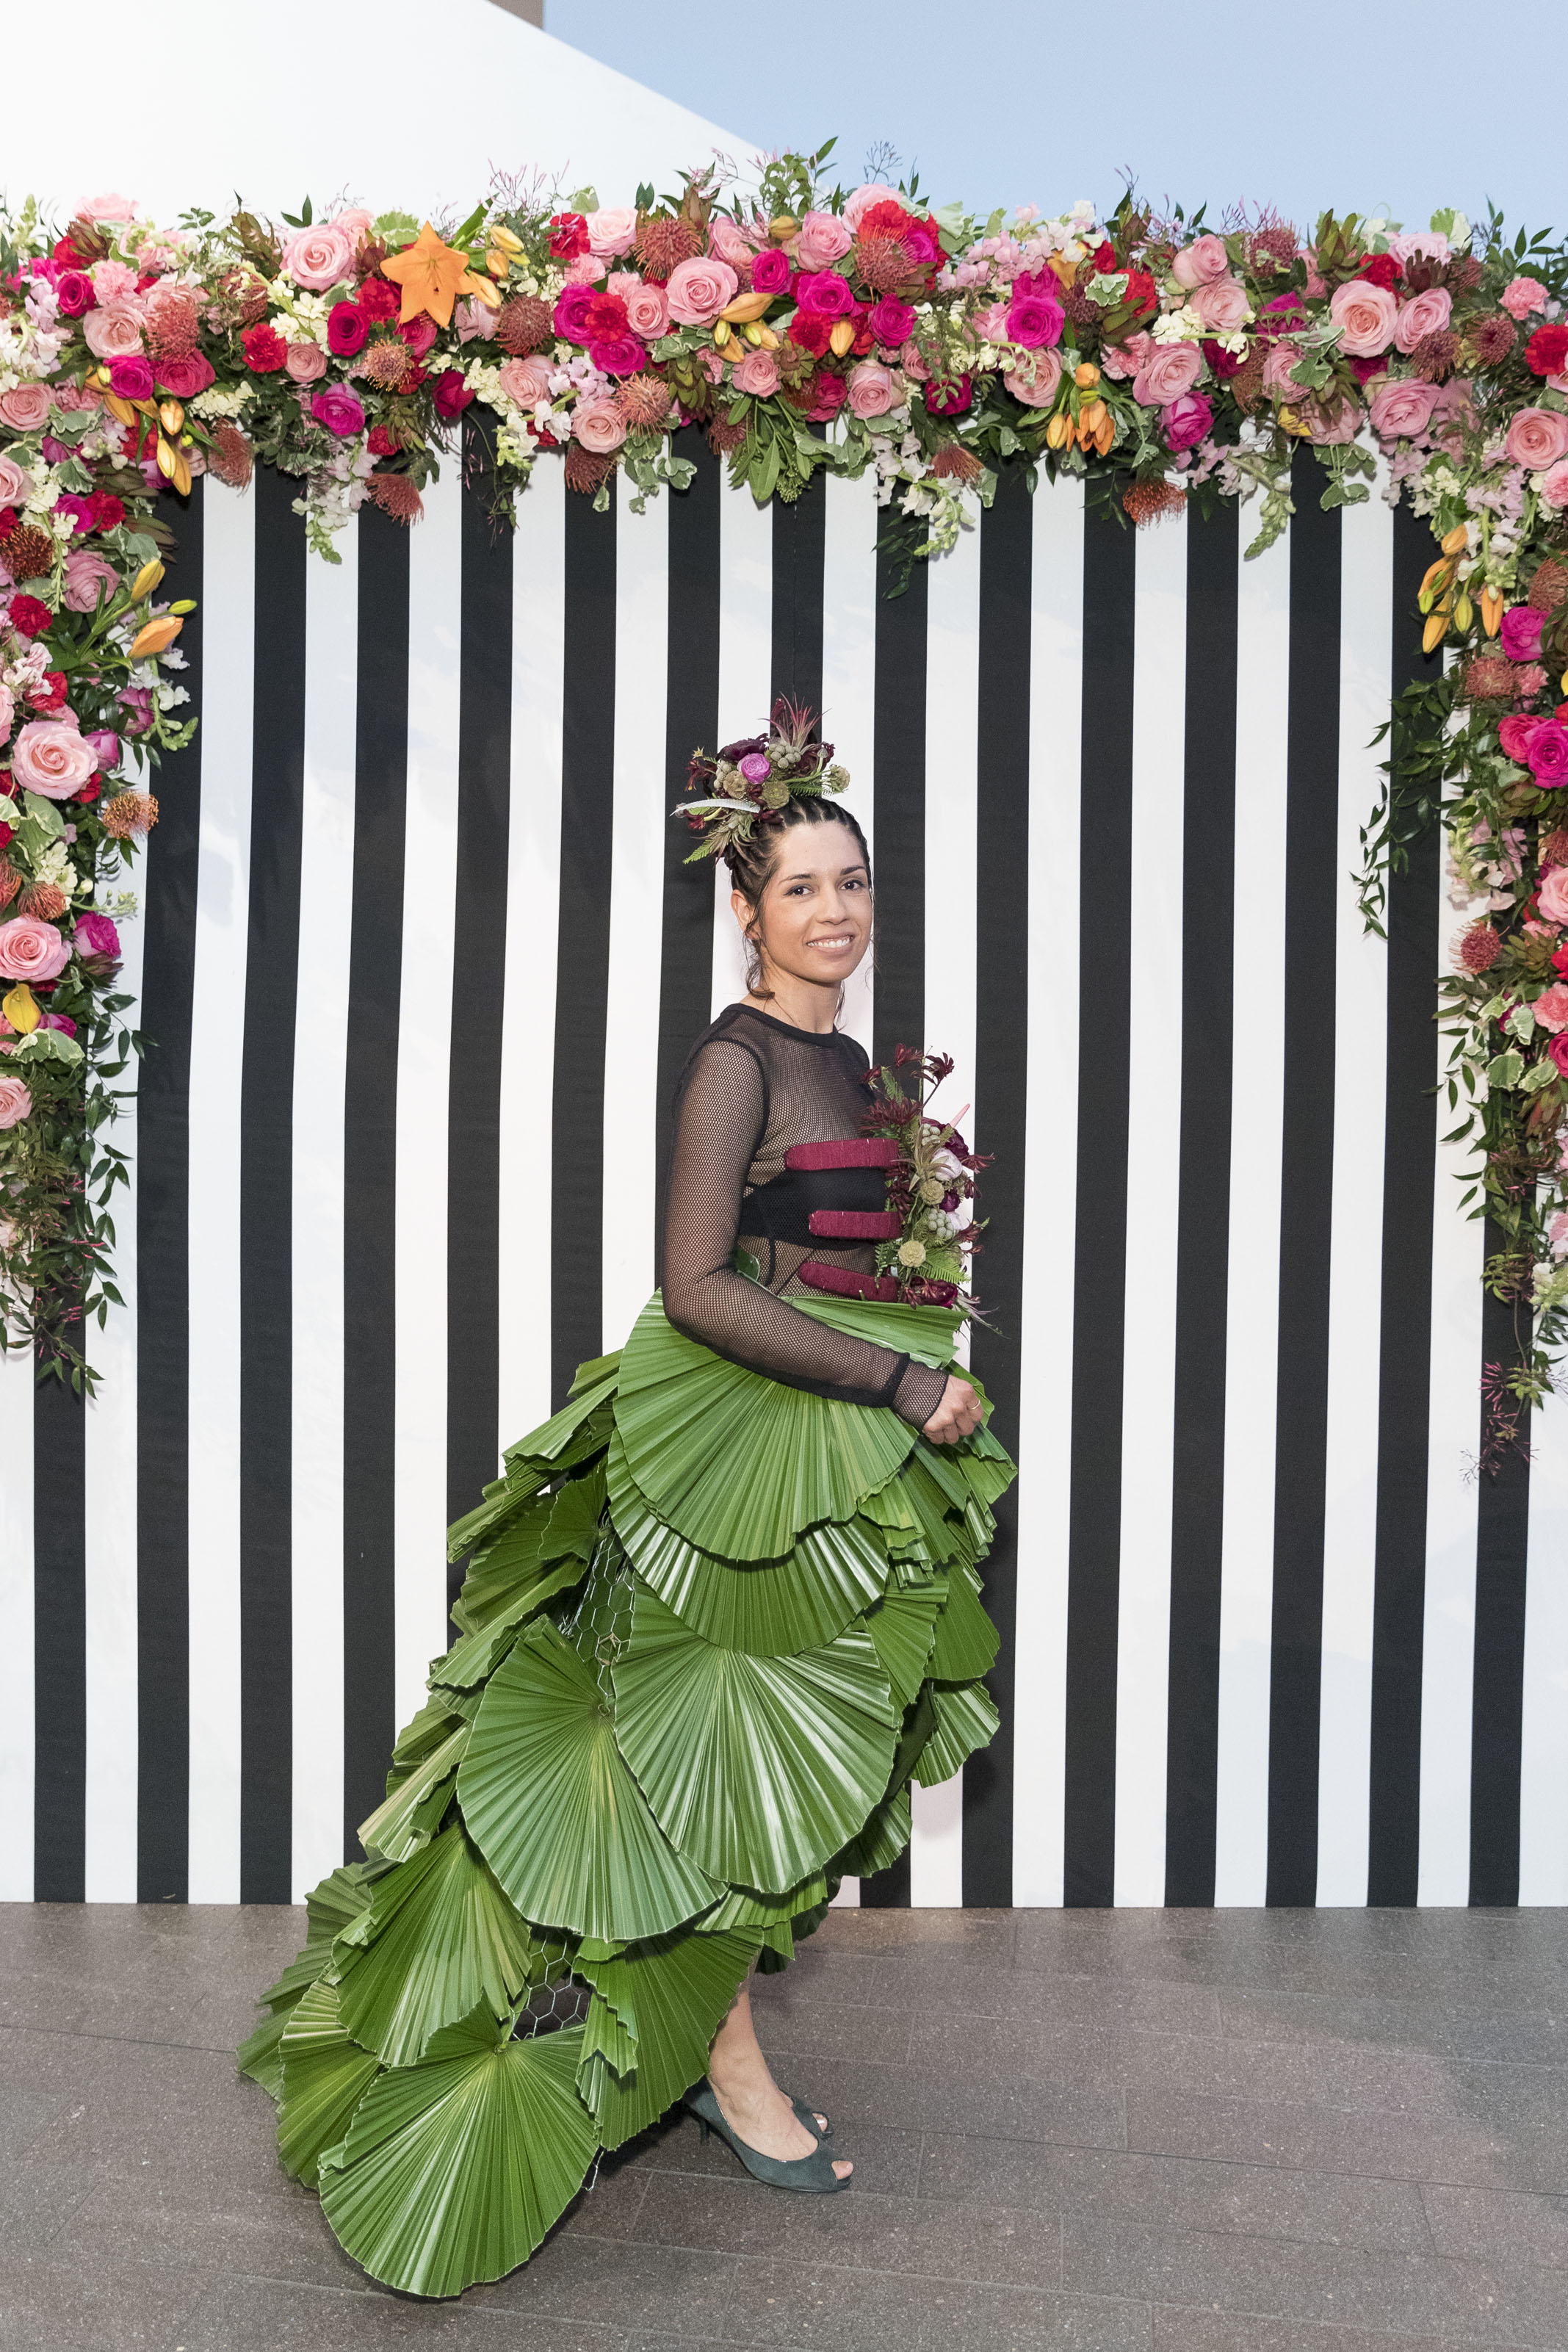 Liberty Velez models Rosa Mendoza's dress with a long train of pal leaves on March 12, 2018. Photo by Drew Altizer/Courtesy of the Fine Arts Museums of San Francisco.